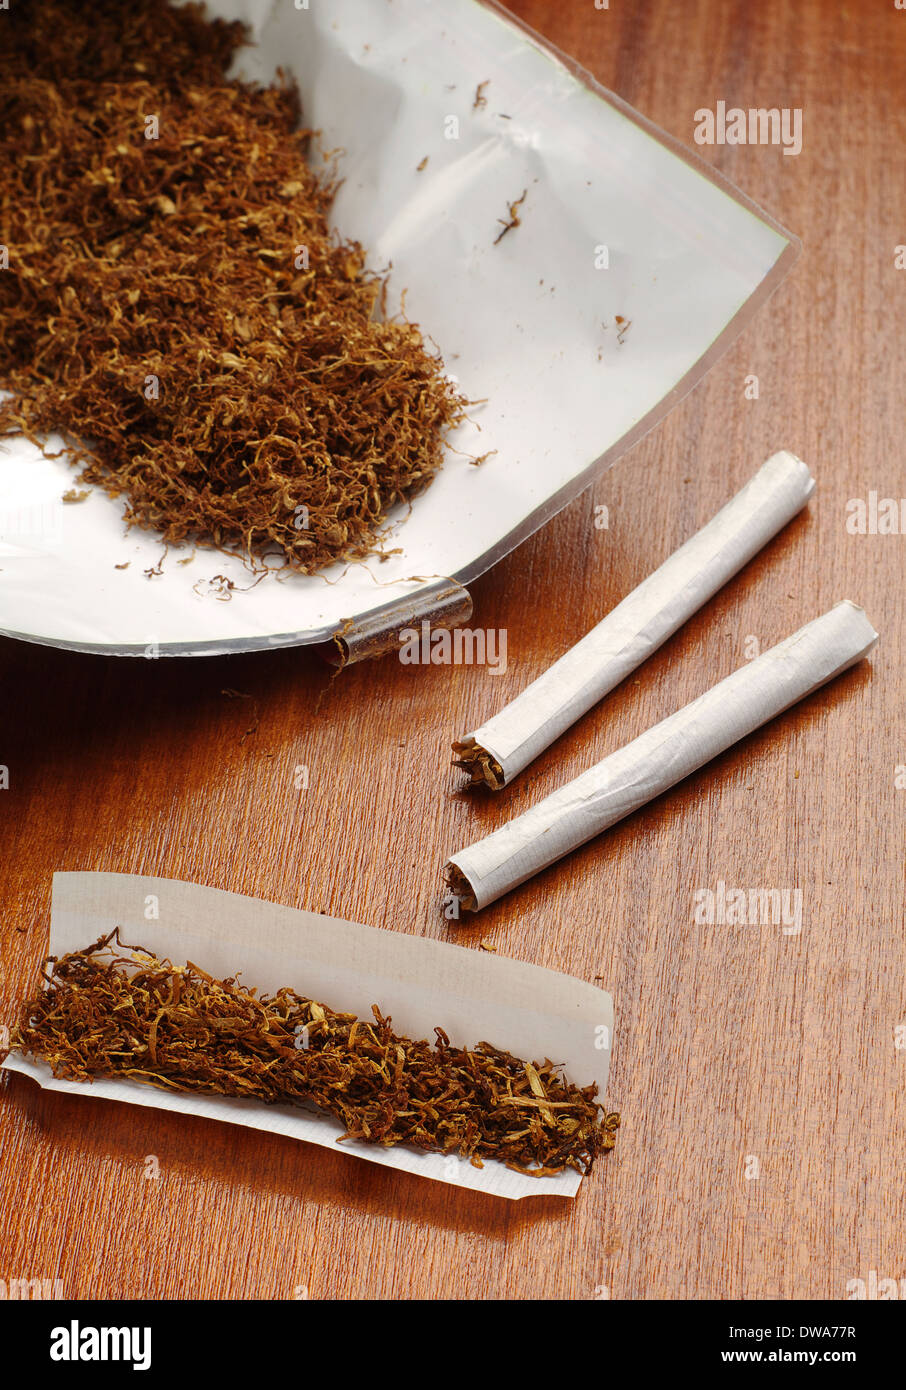 Tobacco and hand rolled cigarettes on brown table Stock Photo